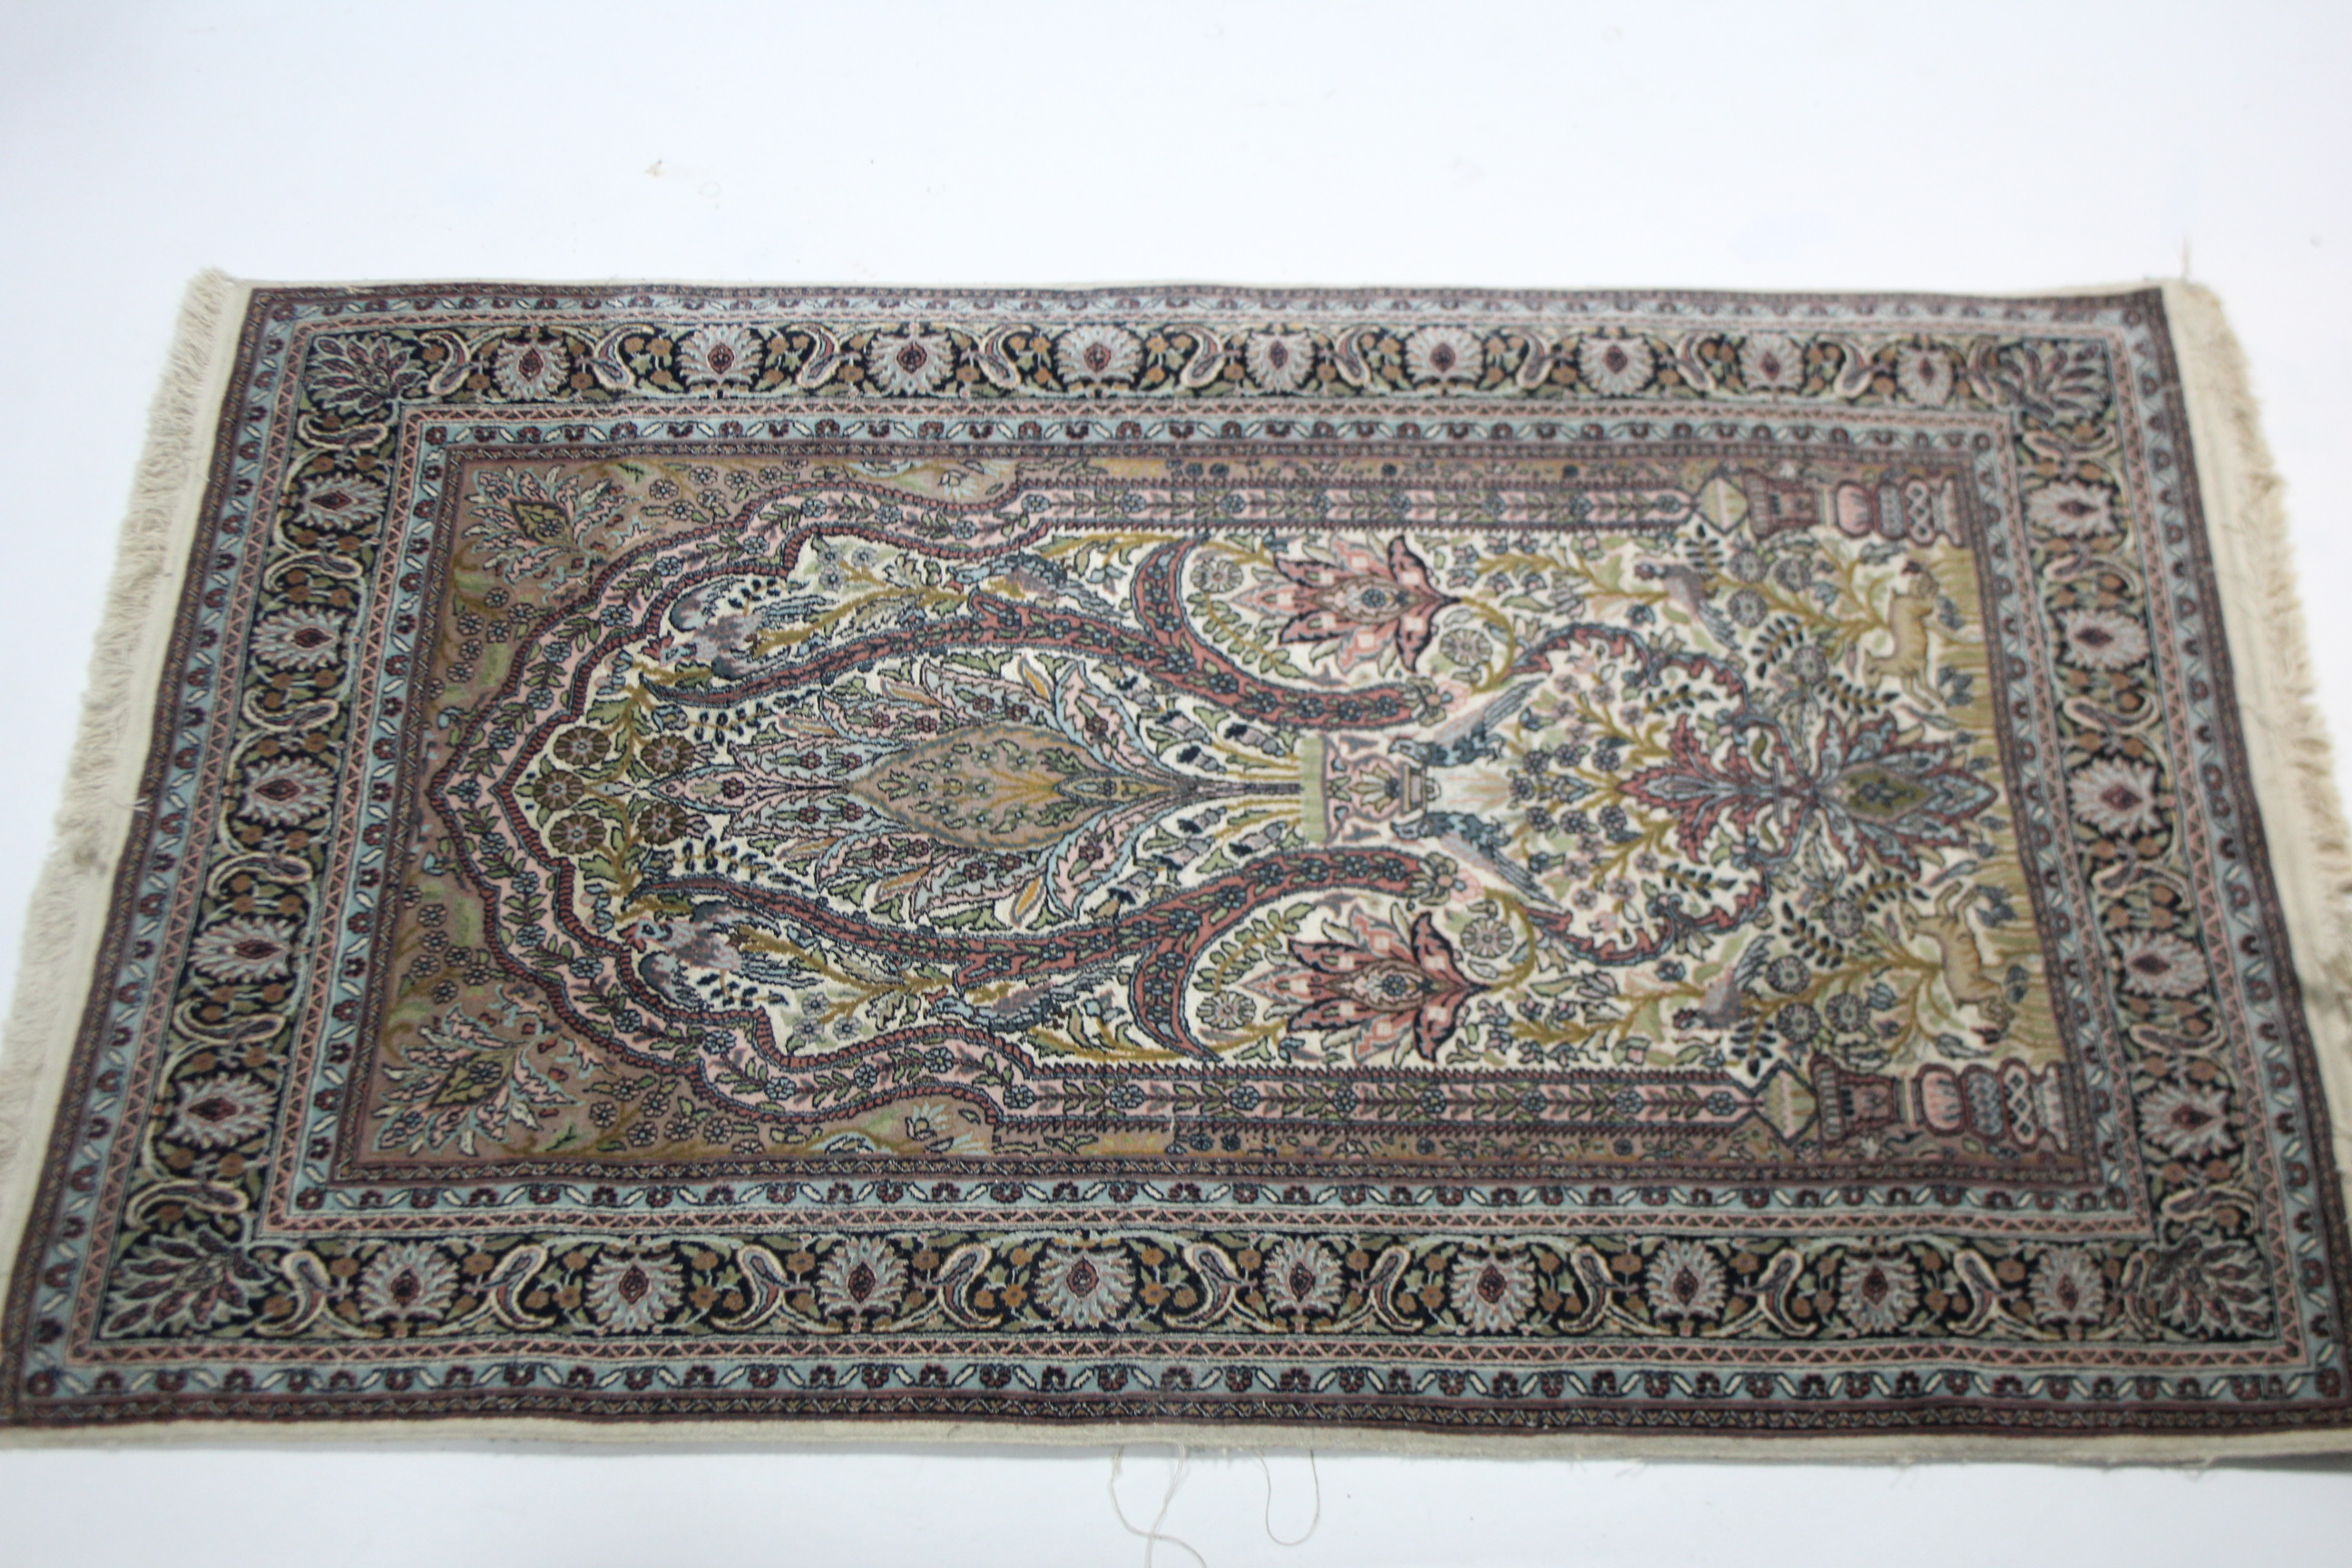 A Persian pattern rug of ivory & pale blue ground, with multi-coloured geometric, floral & animal